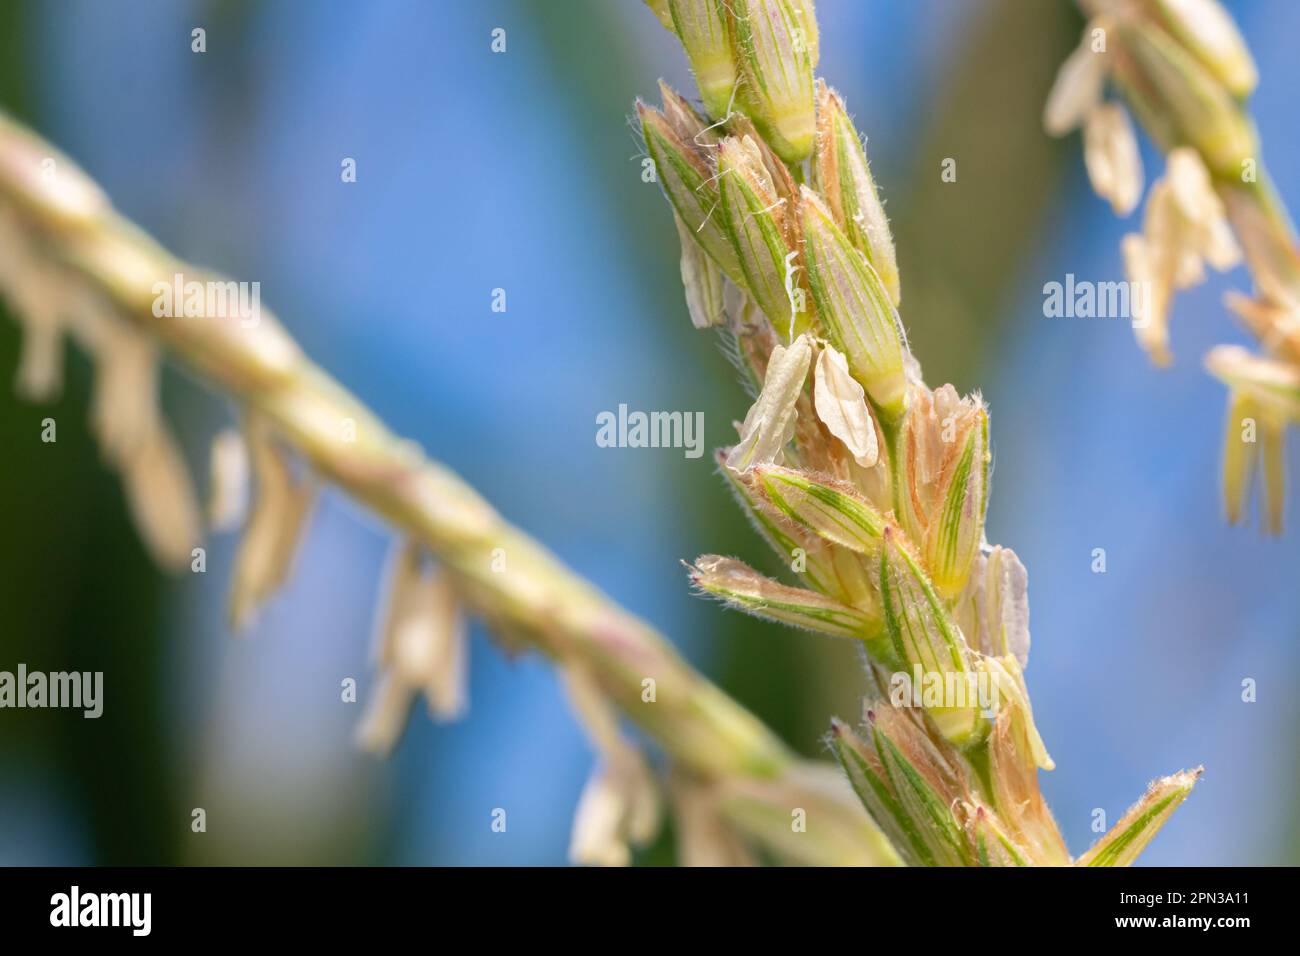 Corn tassel with grains of pollen. Pollination, grain farming and agriculture concept. Stock Photo